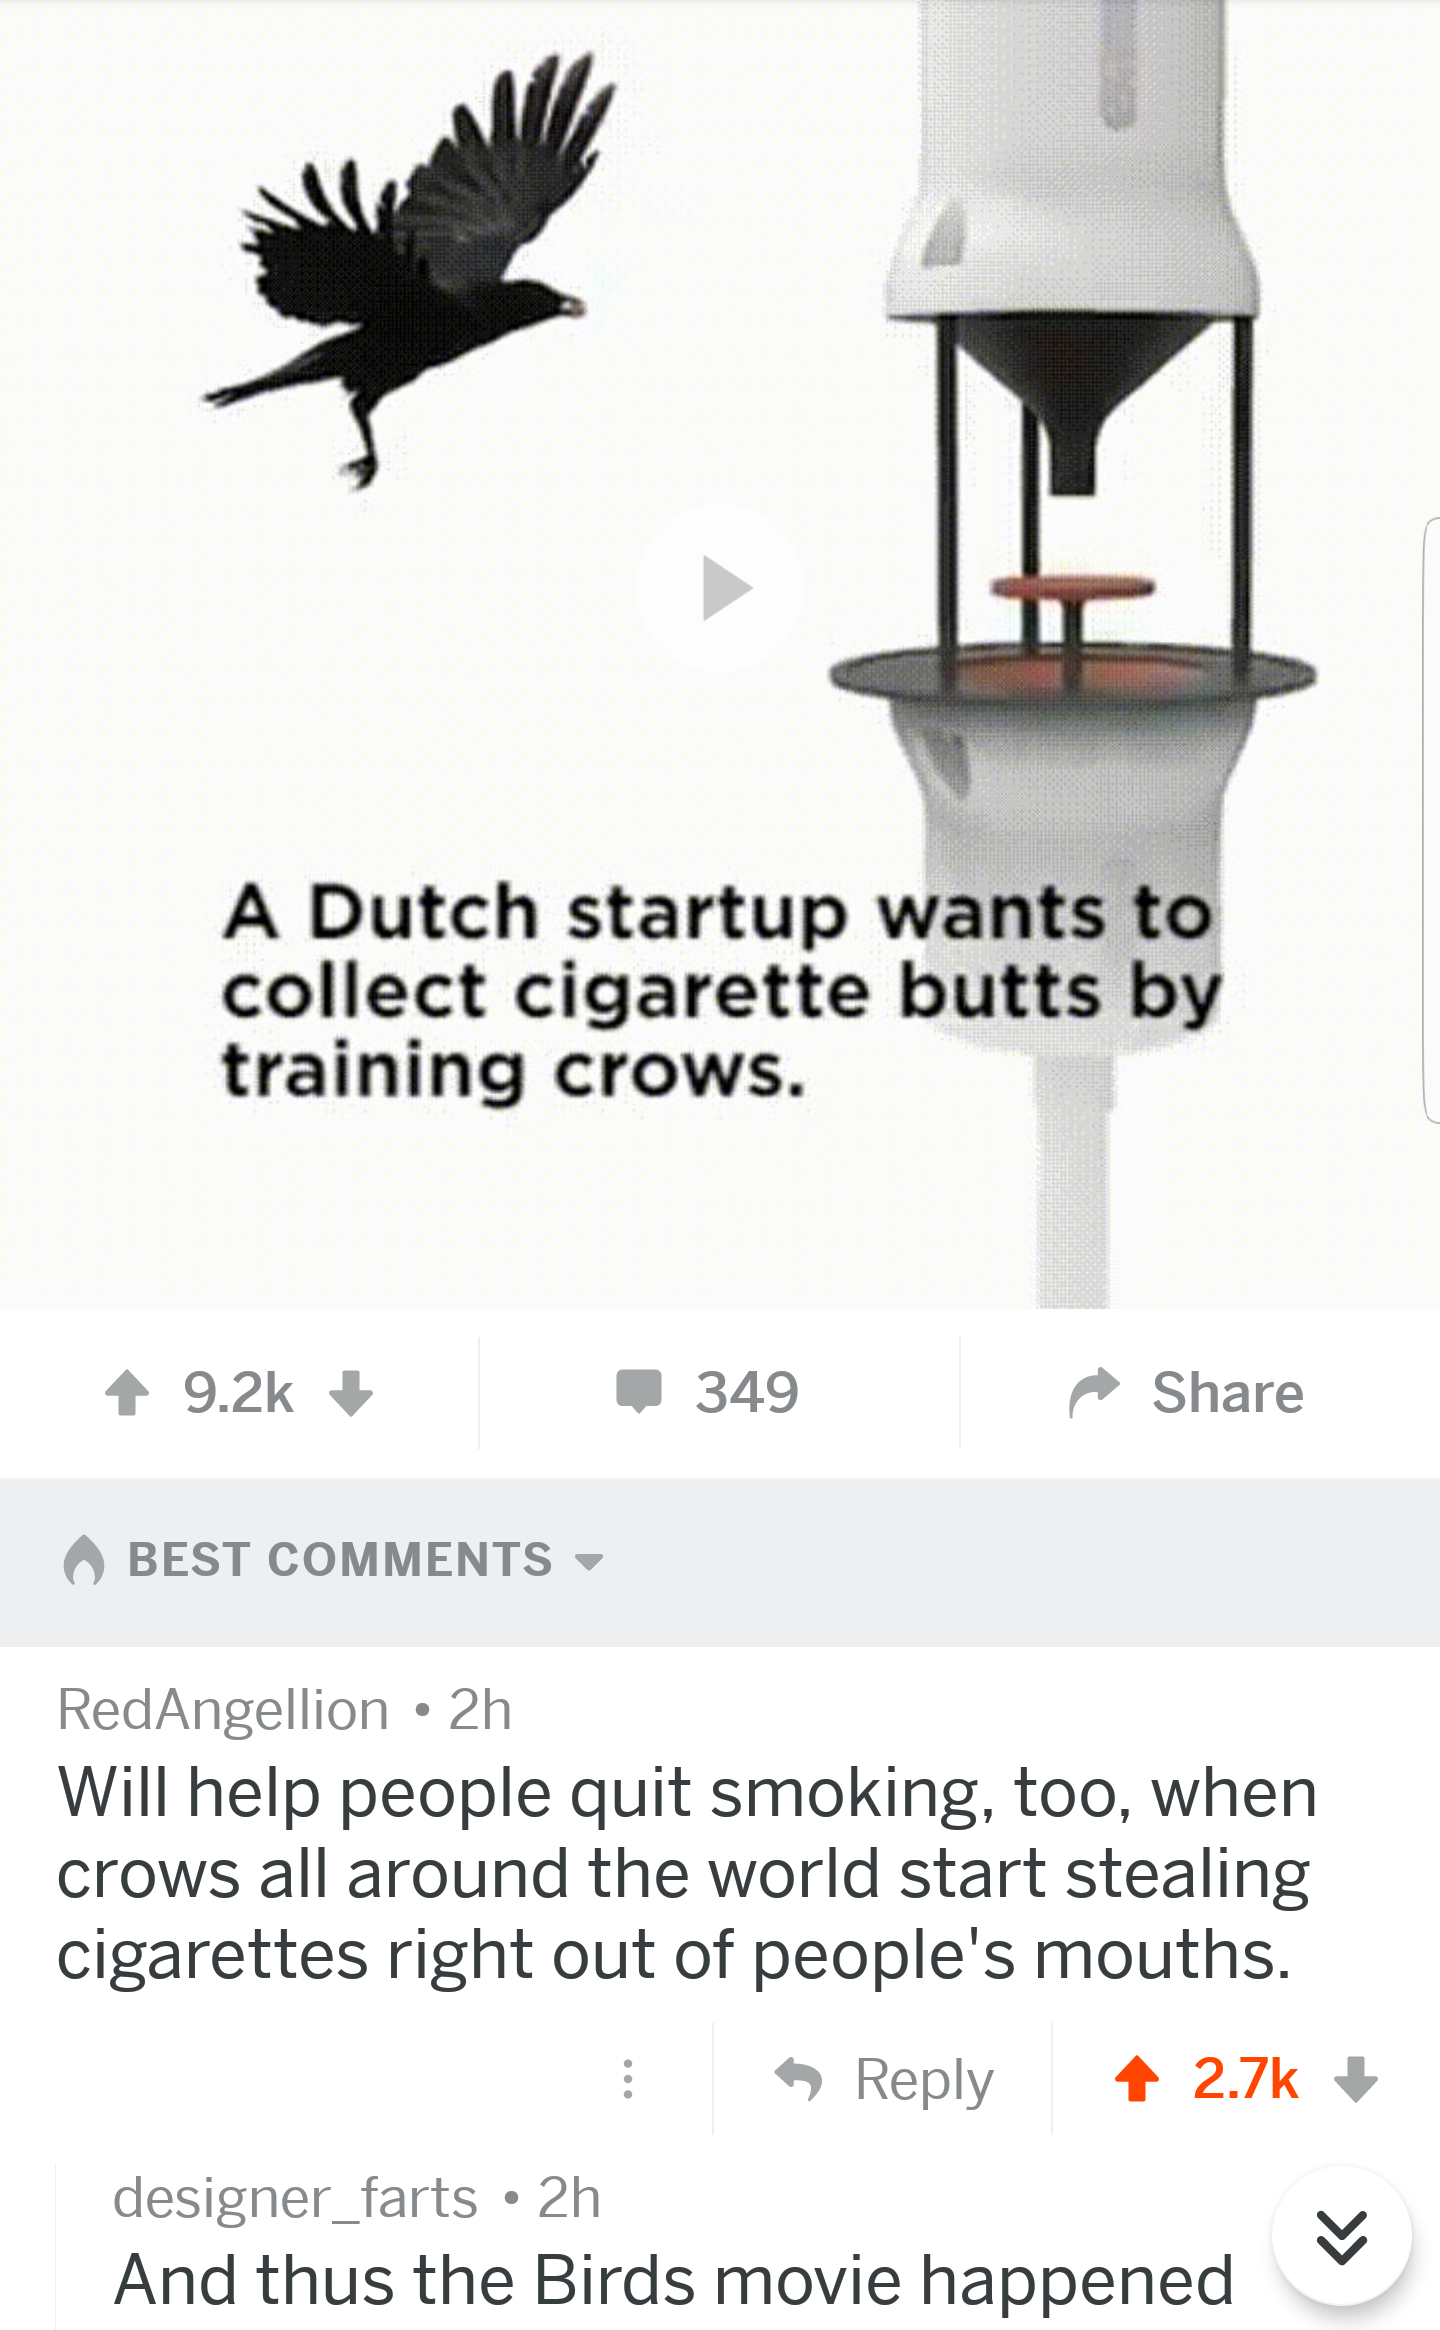 animal - A Dutch startup wants to collect cigarette butts by training crows. 349 A Best RedAngellion.2h Will help people quit smoking, too, when crows all around the world start stealing cigarettes right out of people's mouths. designer_farts. 2h And thus